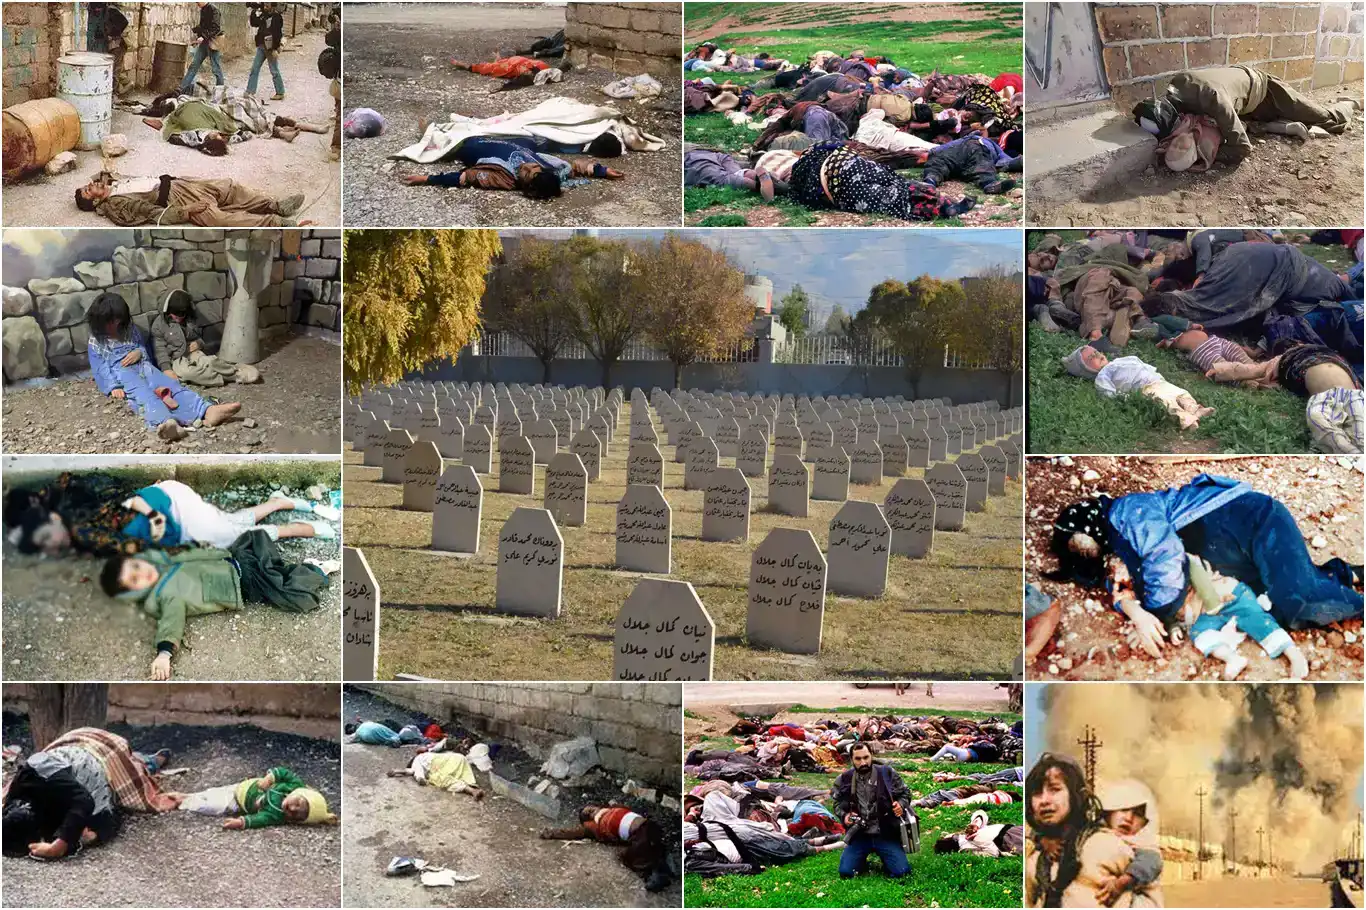 35 years have passed since the brutal massacre in Halabja